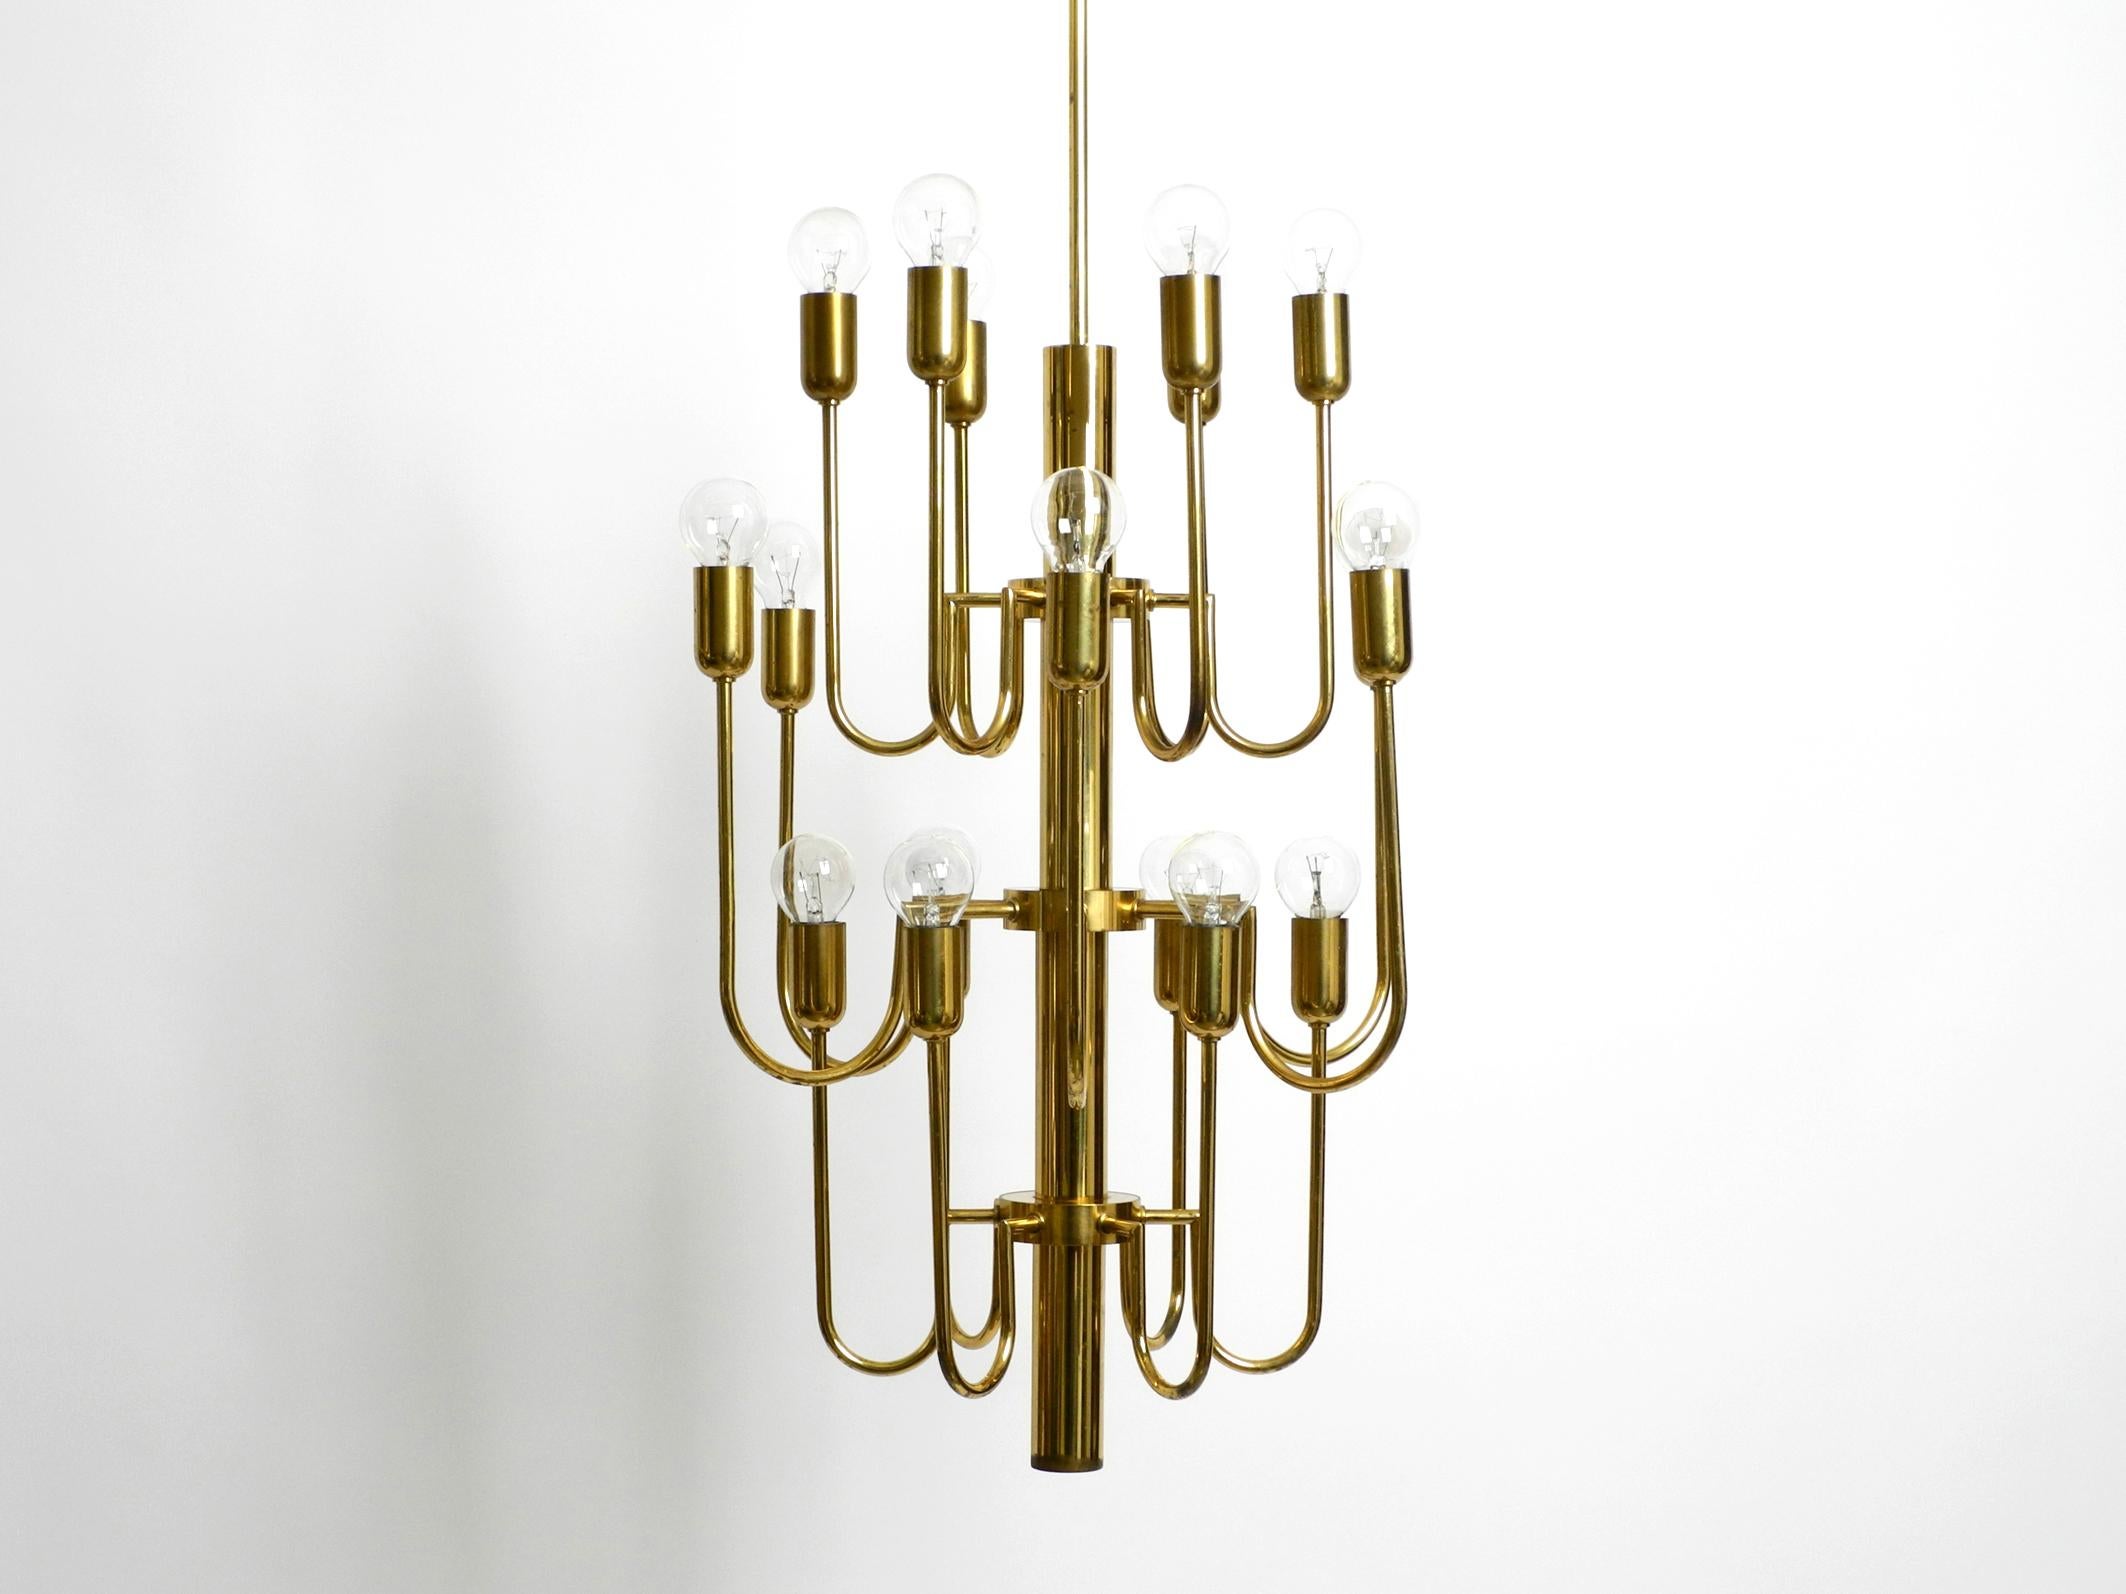 Beautiful midcentury brass chandelier with a long brass rod. The chandelier has 18 arms, each with one E14 socket up to 40W.
Enough light even for large rooms.
Great extraordinary design from the 1960s.
Frame, rod and canopy are made entirely of